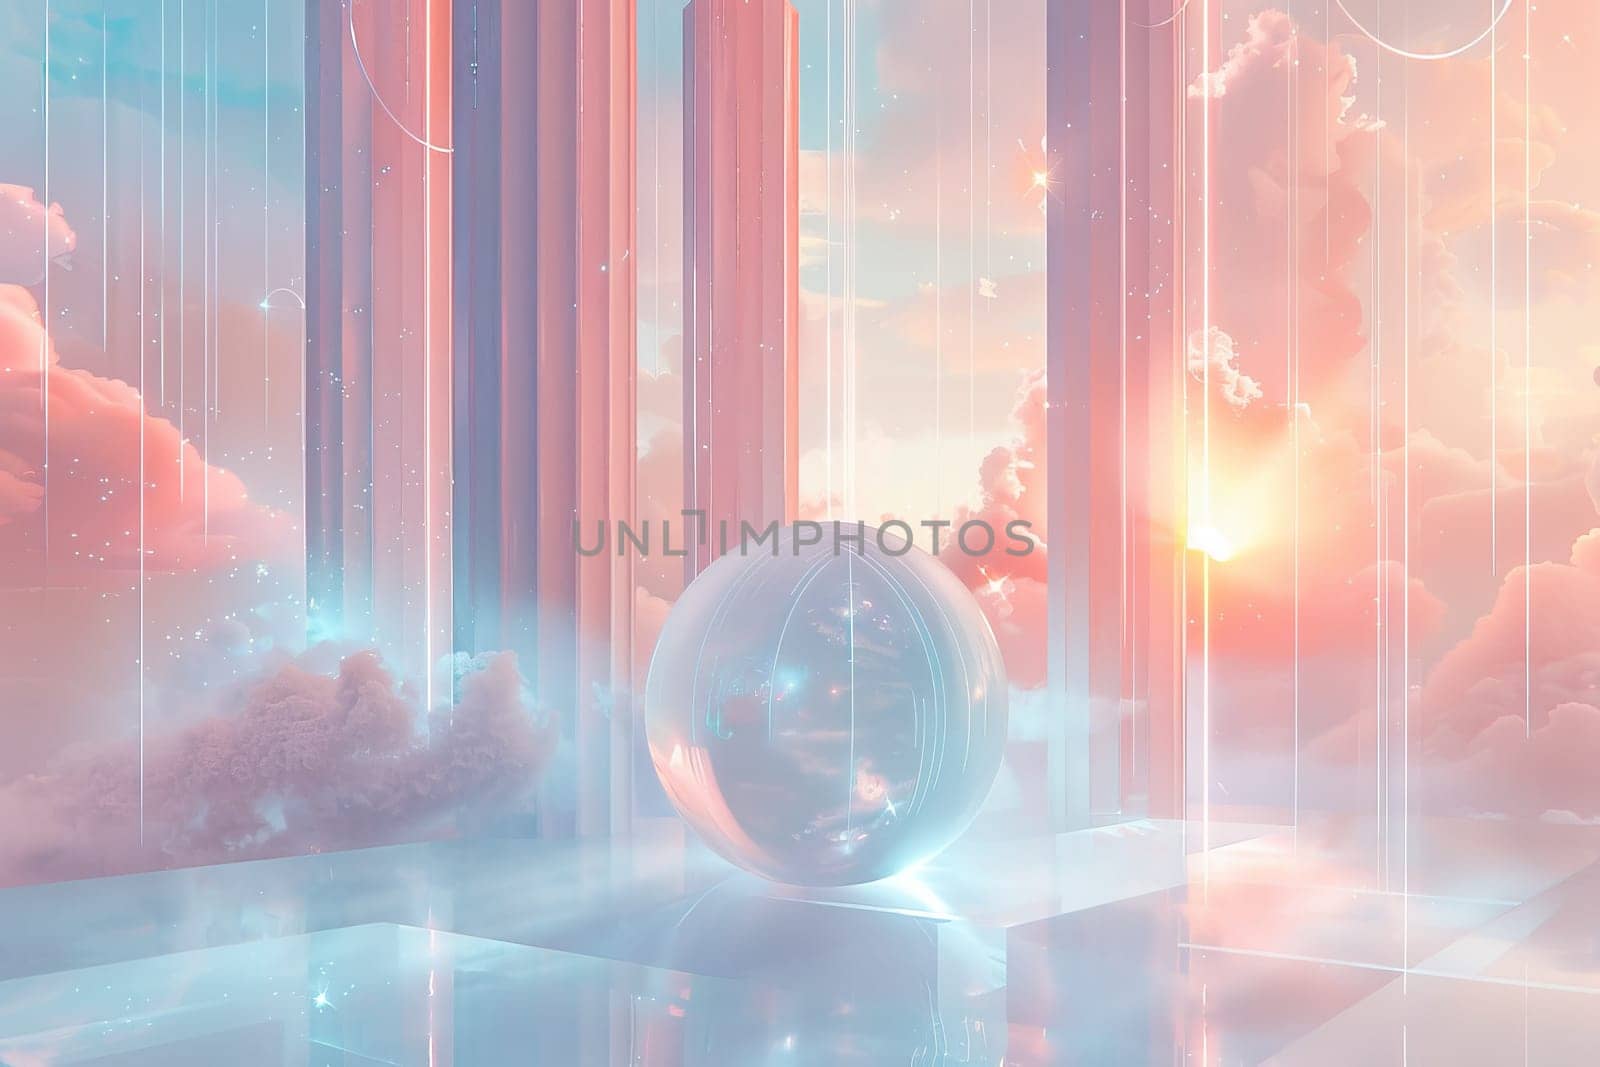 A large sphere is floating in a room with a pink and blue sky. The sphere is surrounded by pillars and is the center of attention. The room is filled with light and the atmosphere is serene